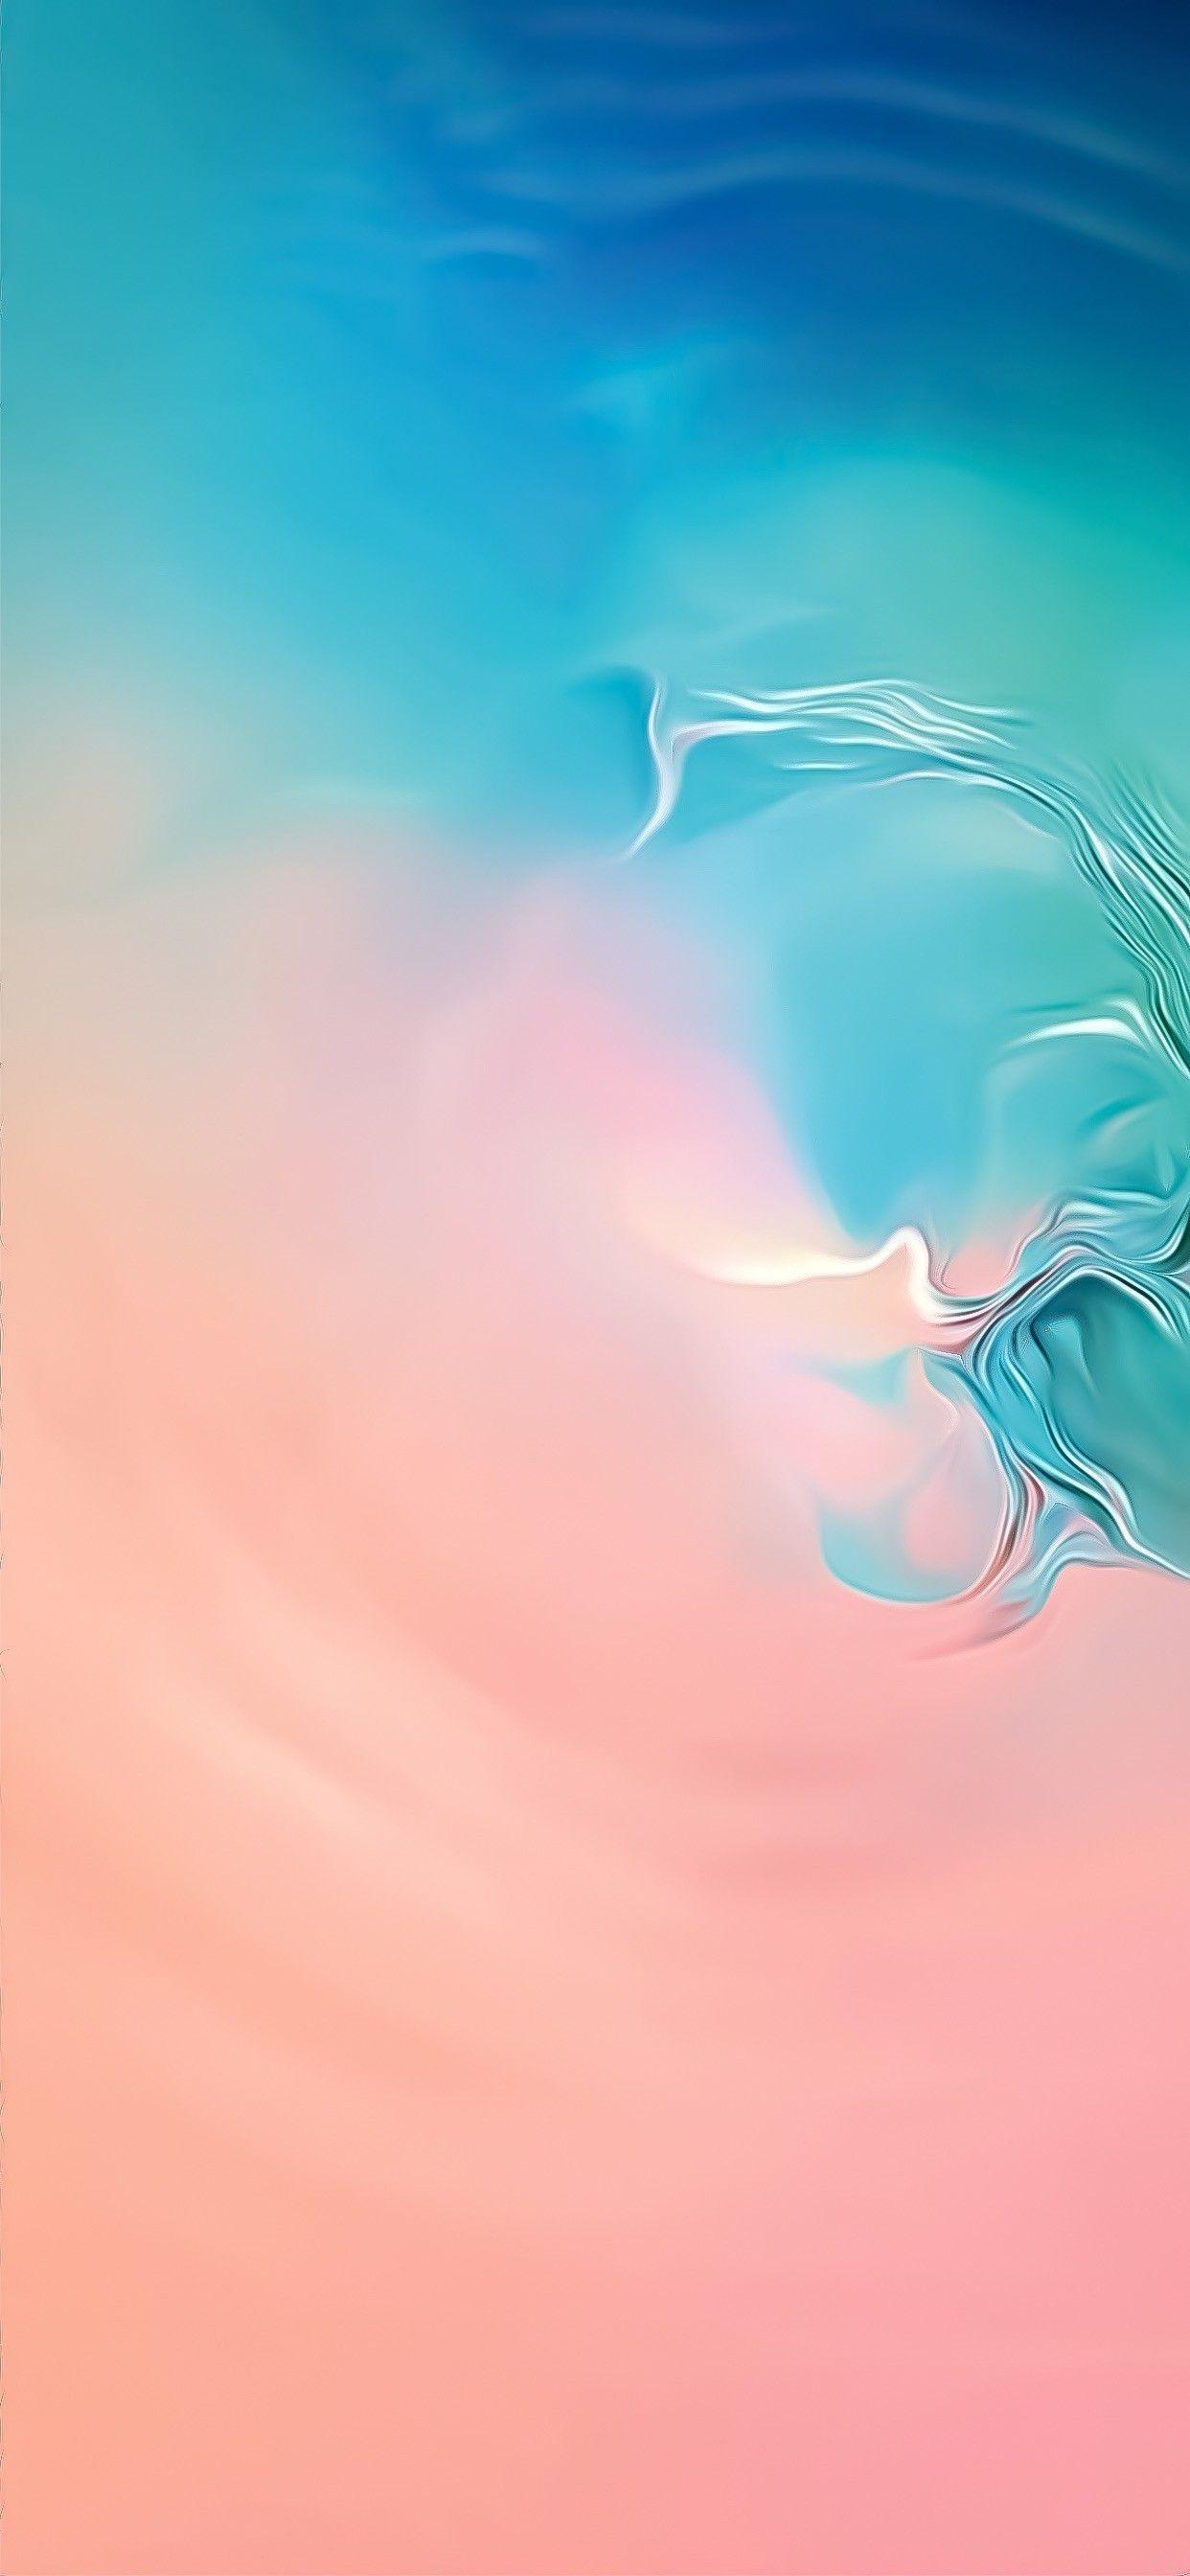 Download Samsung Galaxy S10 And S10 Plus Wallpapers